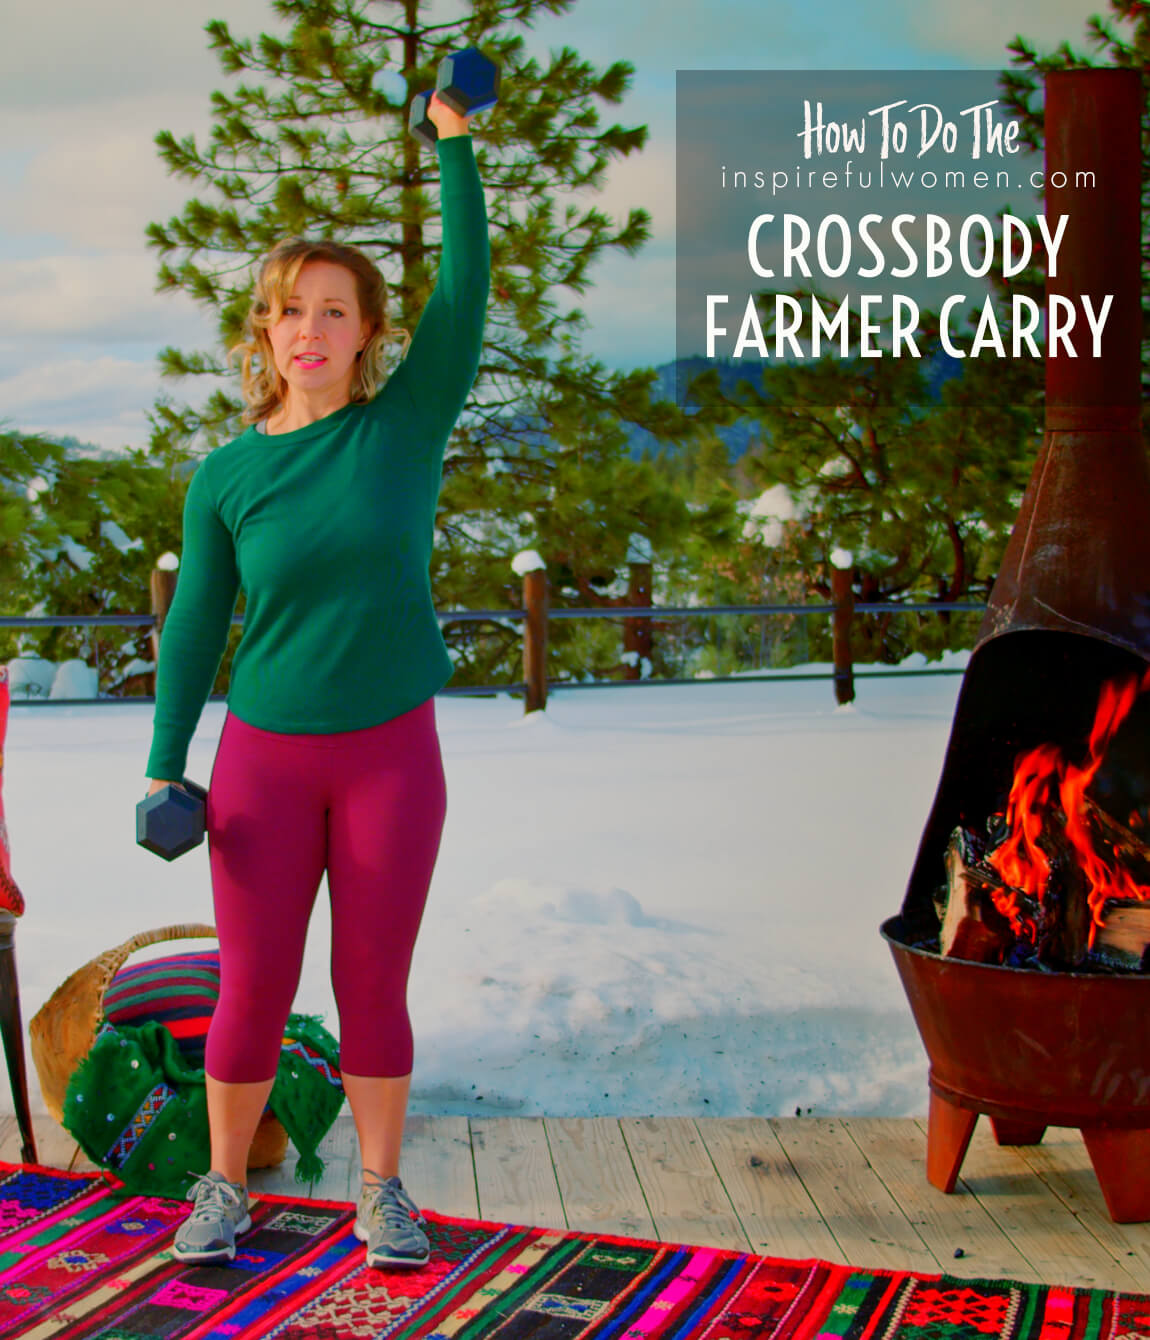 how-to-cross-body-farmer-carry-mixed-grip-dumbbells-total-body-core-exercise-proper-form